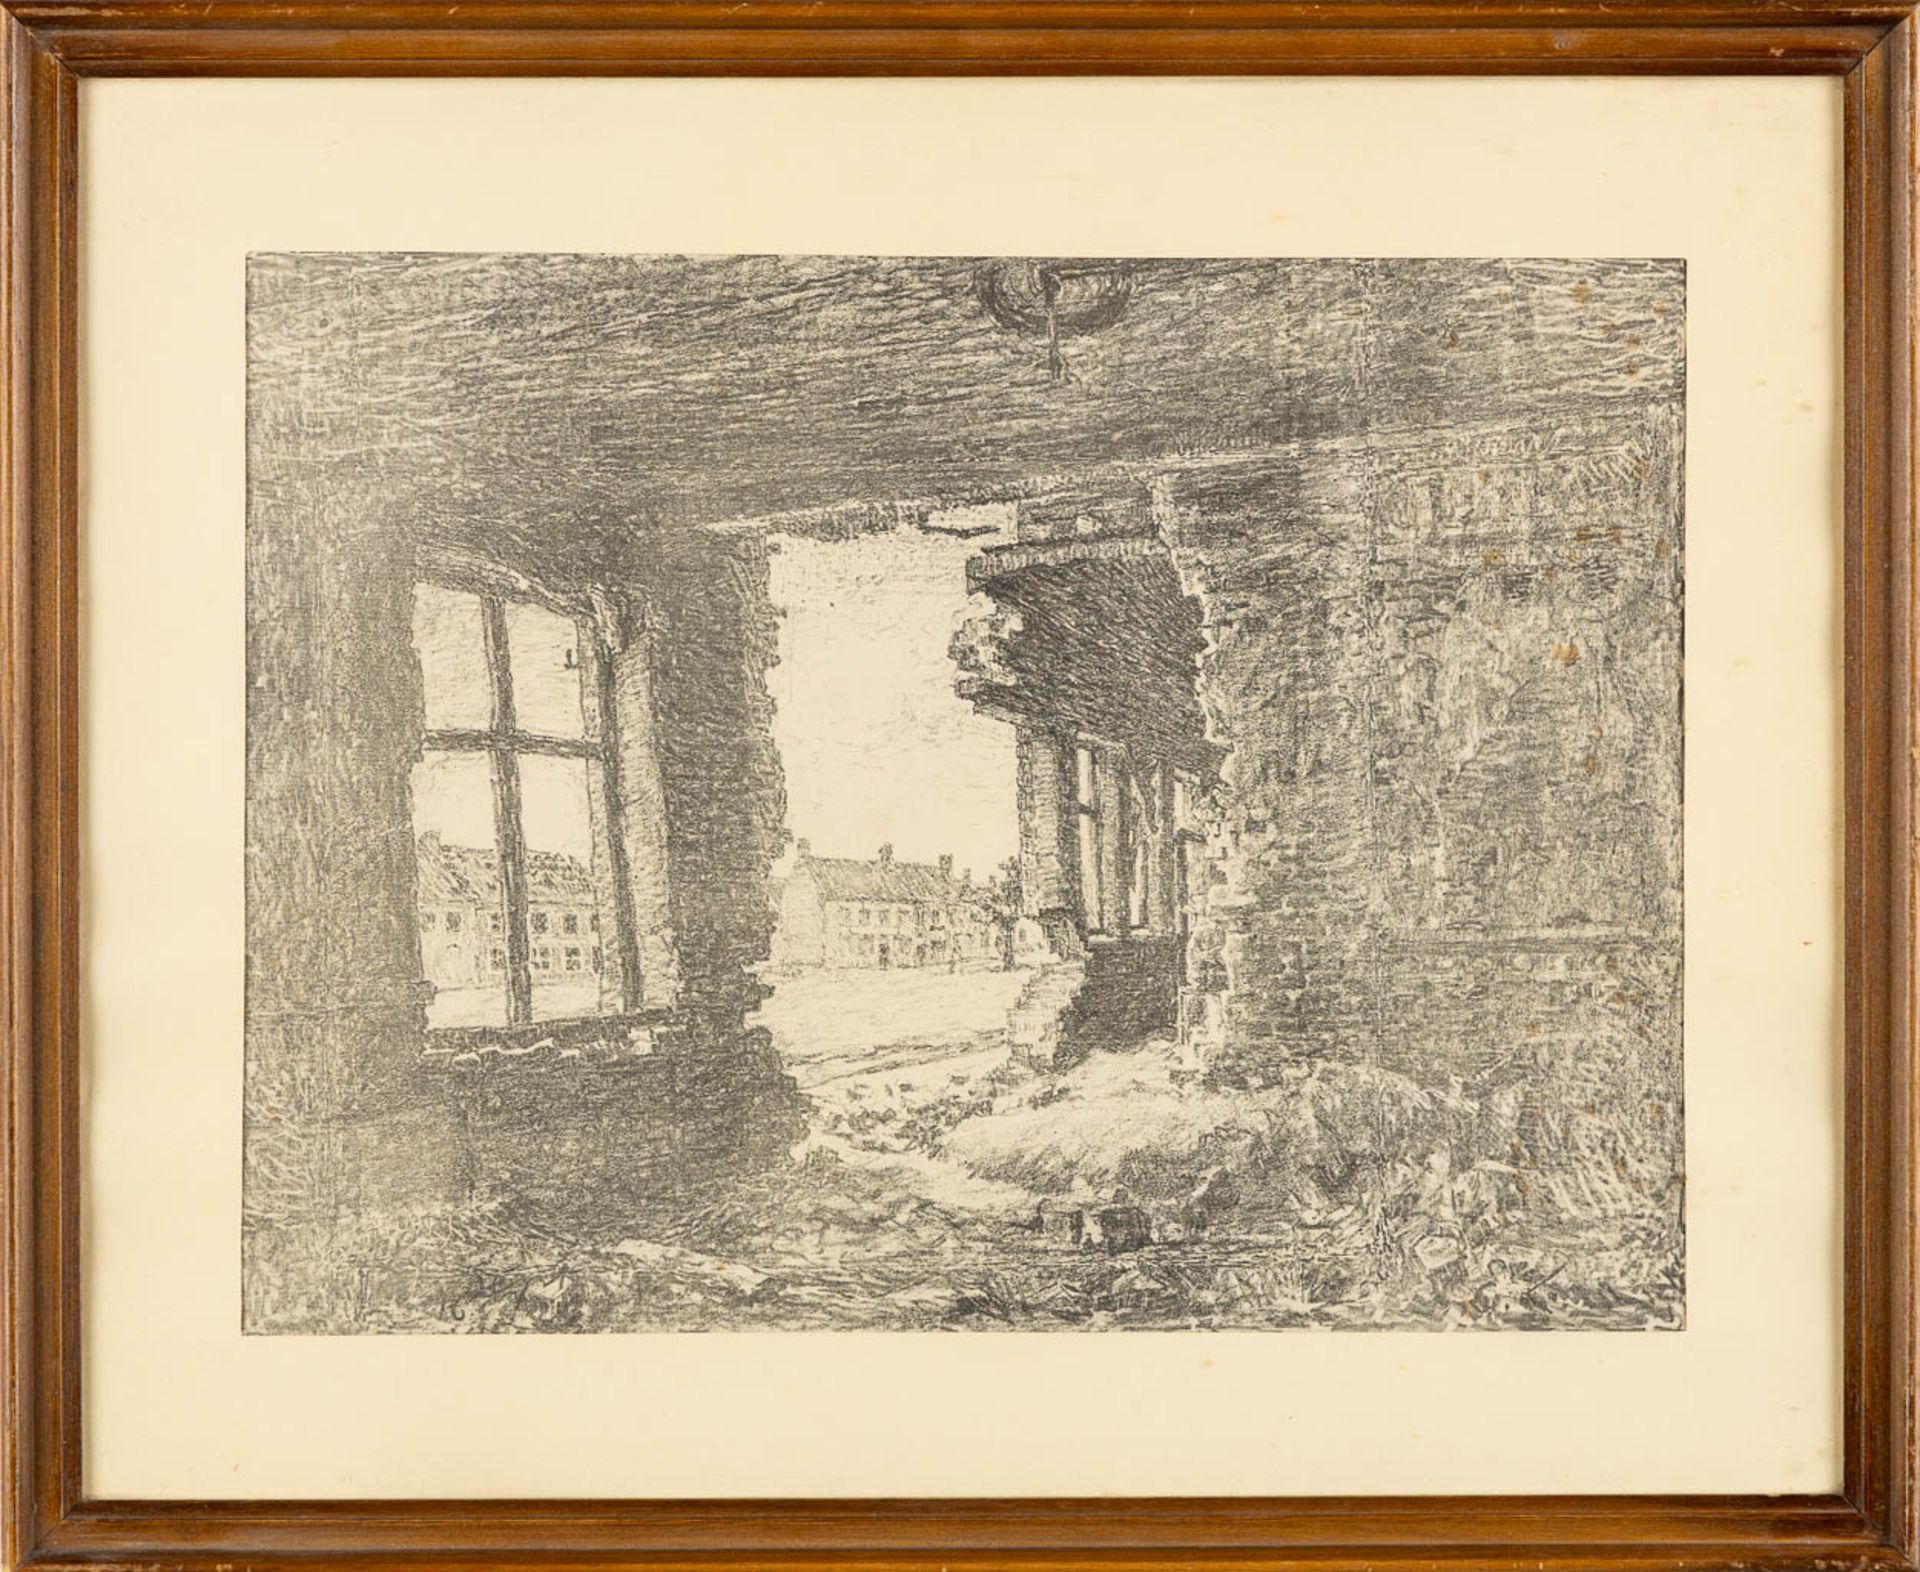 Emile CLAUS (1849-1924) 'Loo Sept, 1916' Two Lithographs. (W:42 x H:31,5 cm) - Image 7 of 10